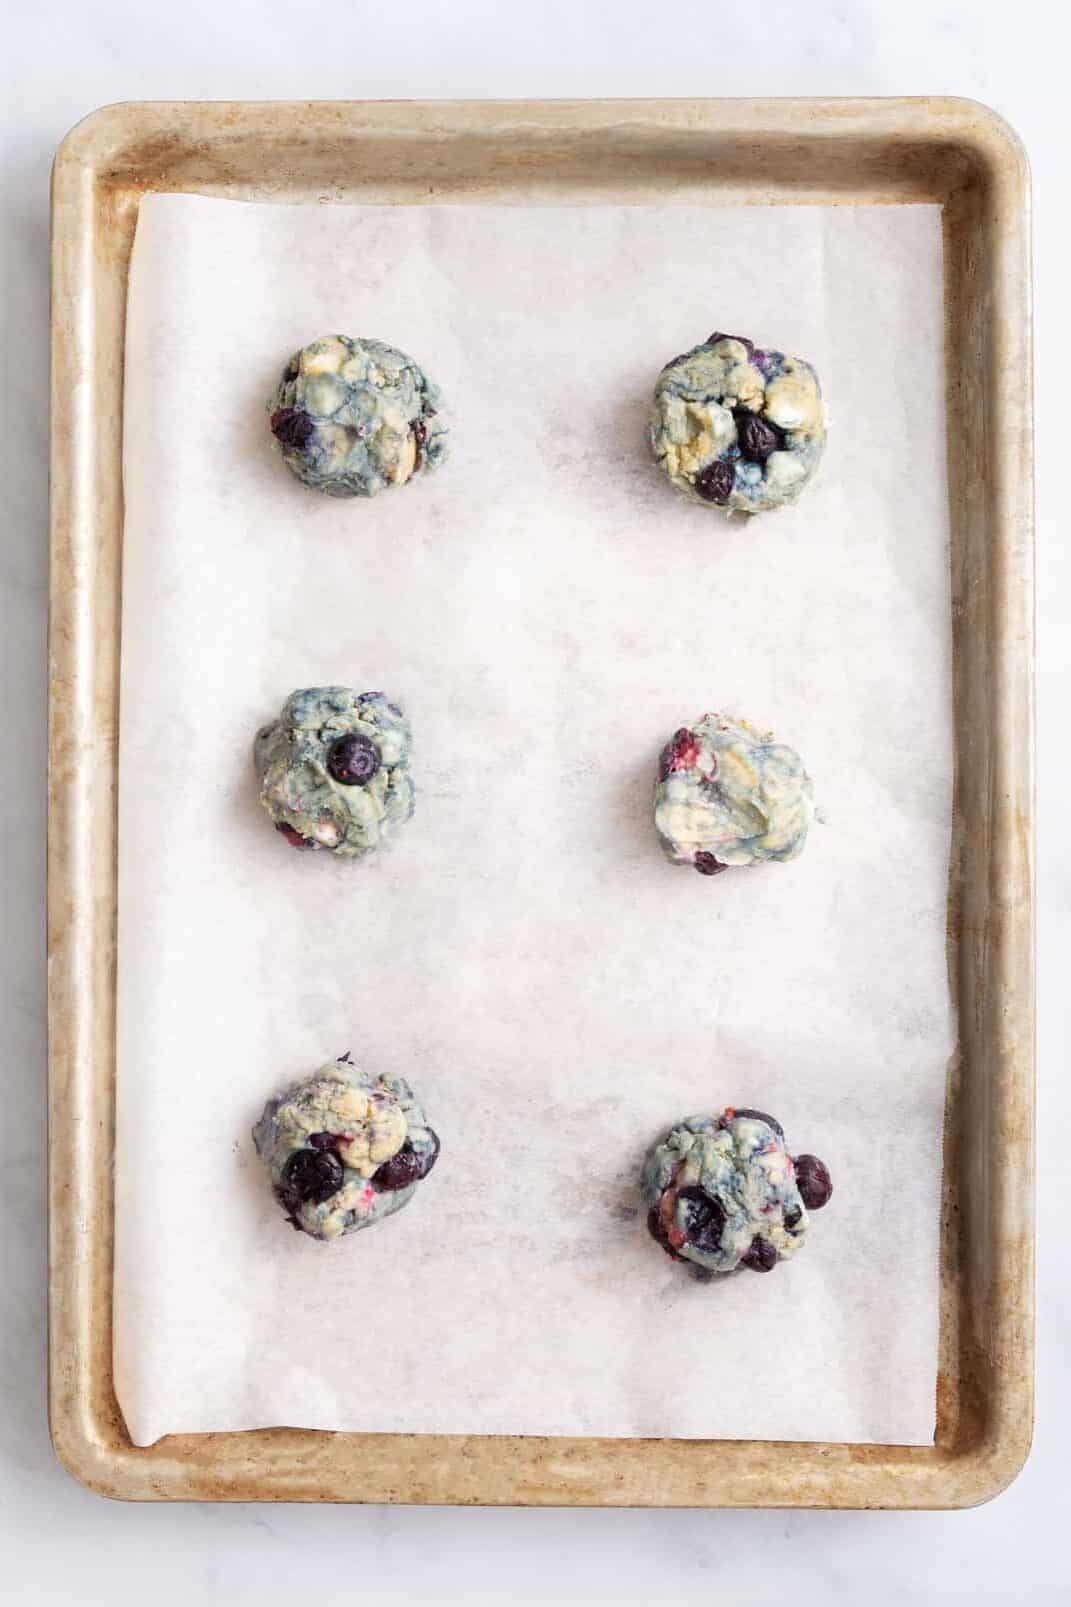 six arranged blueberry cookie dough balls on a parchment-lined baking sheet.